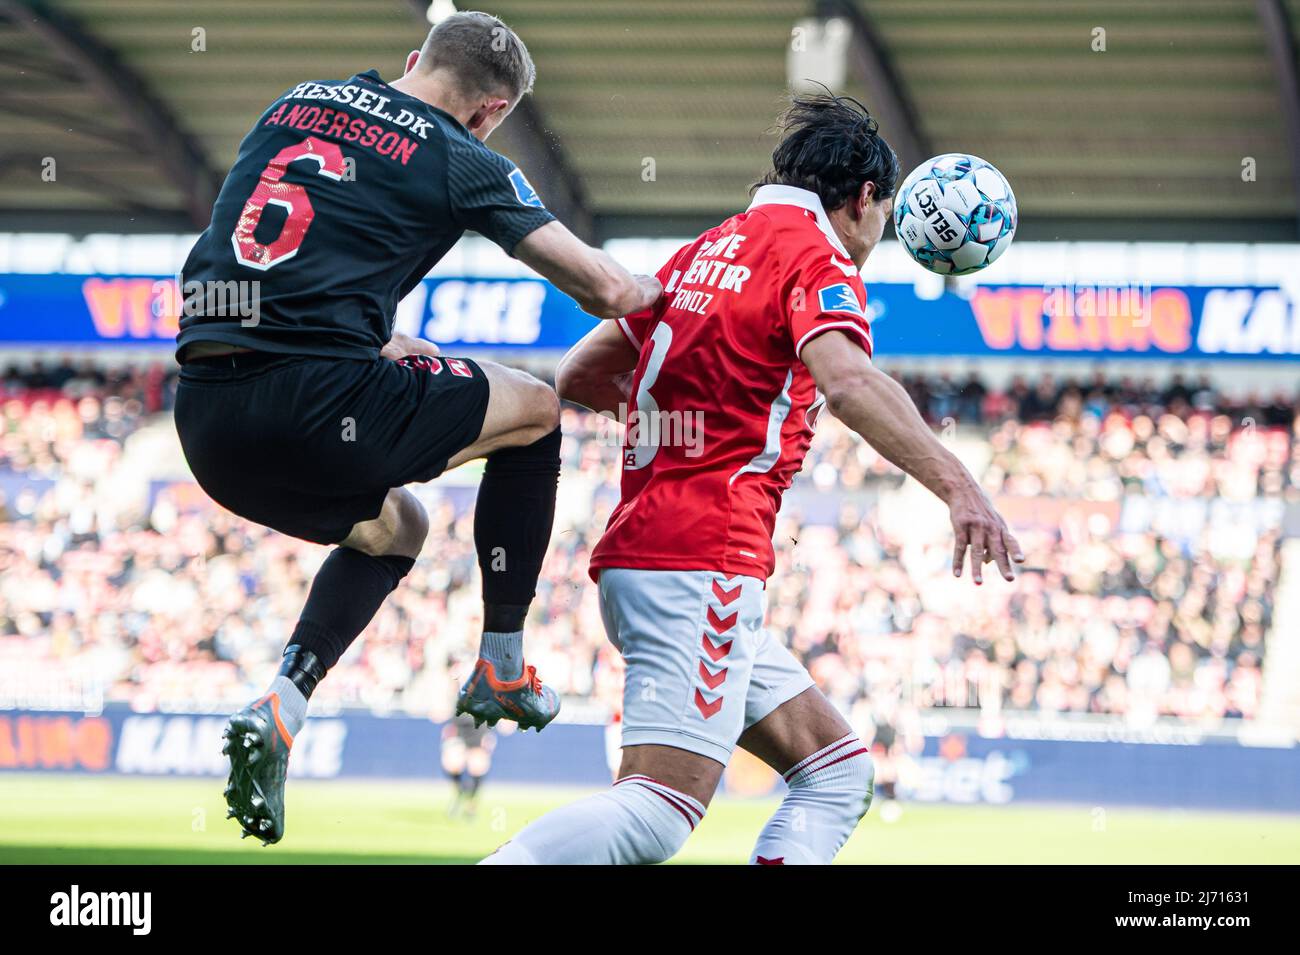 Herning, Denmark. 04th, May 2022. Joel Andersson (6) of FC Midtjylland and Miiko Albornoz (3) of Vejle Bodlklub seen during the Sydbank Cup match between FC Midtjylland and Vejle Boldklub at MCH Arena in Herning. (Photo credit: Gonzales Photo - Morten Kjaer). Stock Photo